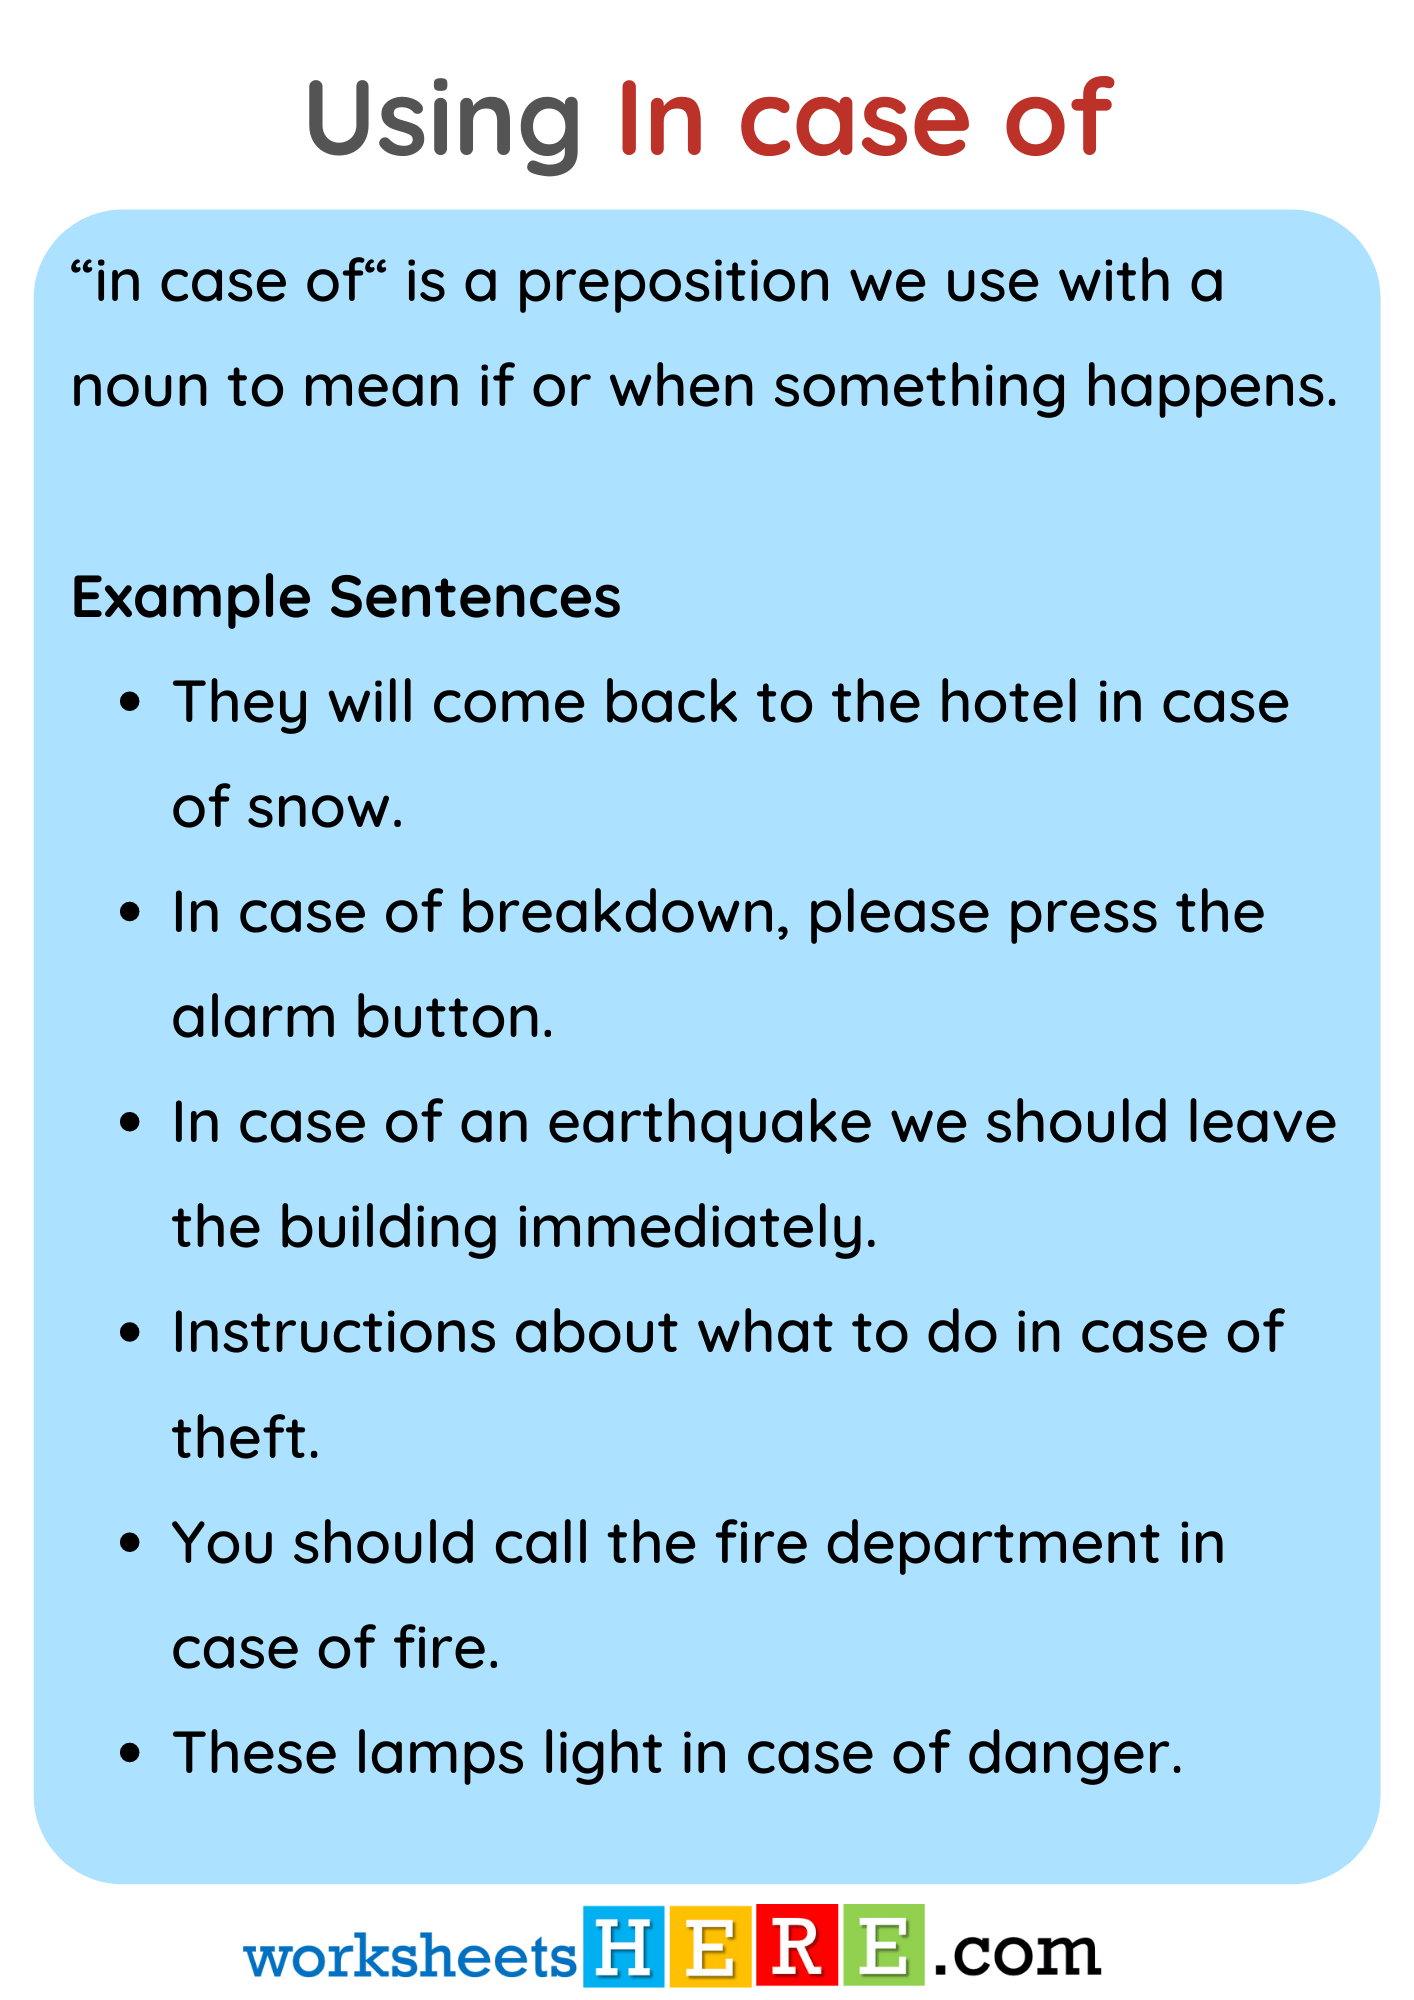 Using in case of, Definition and Example Sentences PDF Worksheet For Students